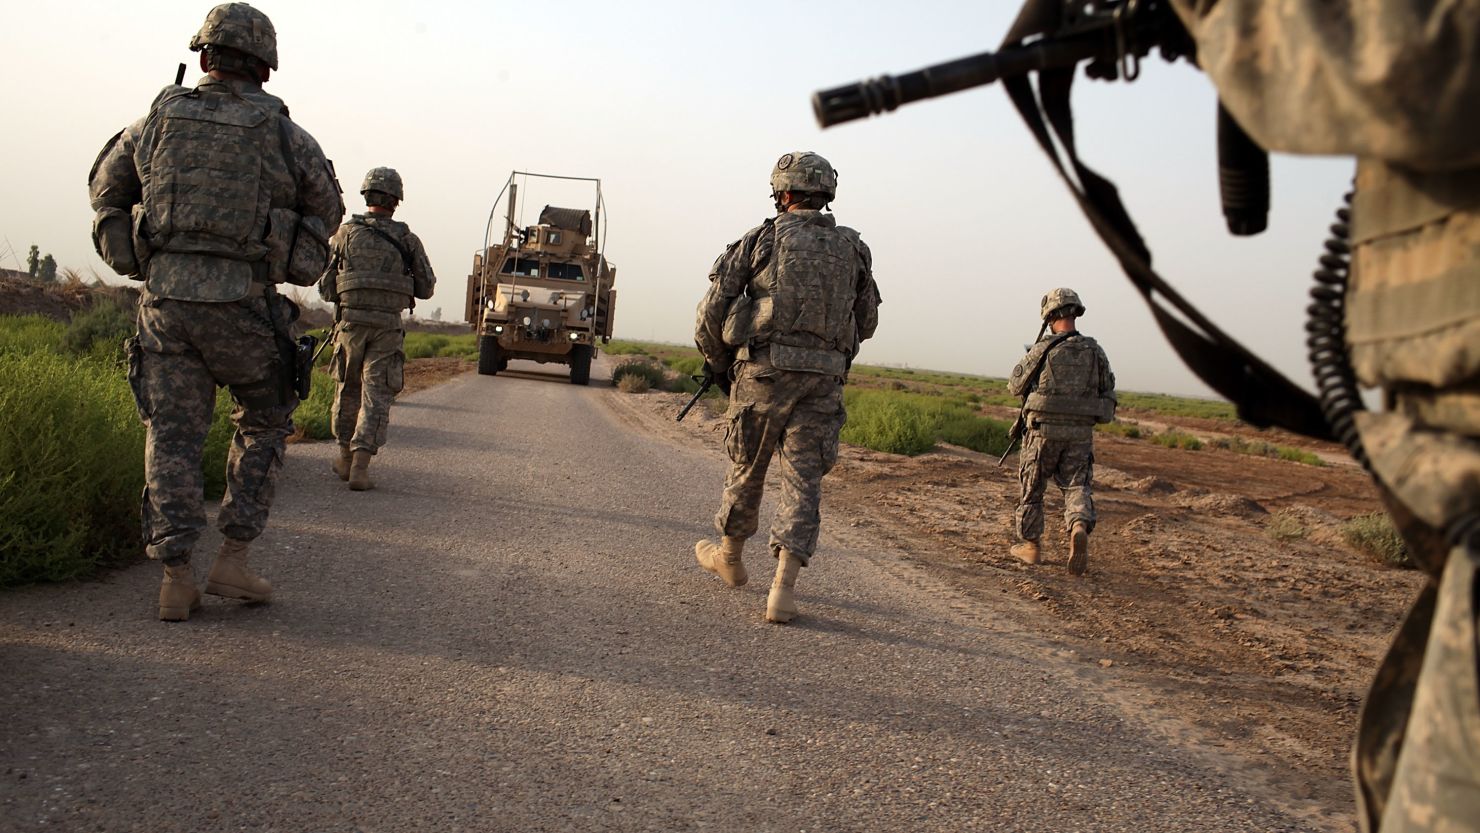 President Obama said Friday that the United States will withdraw almost all its troops from Iraq by year's end.